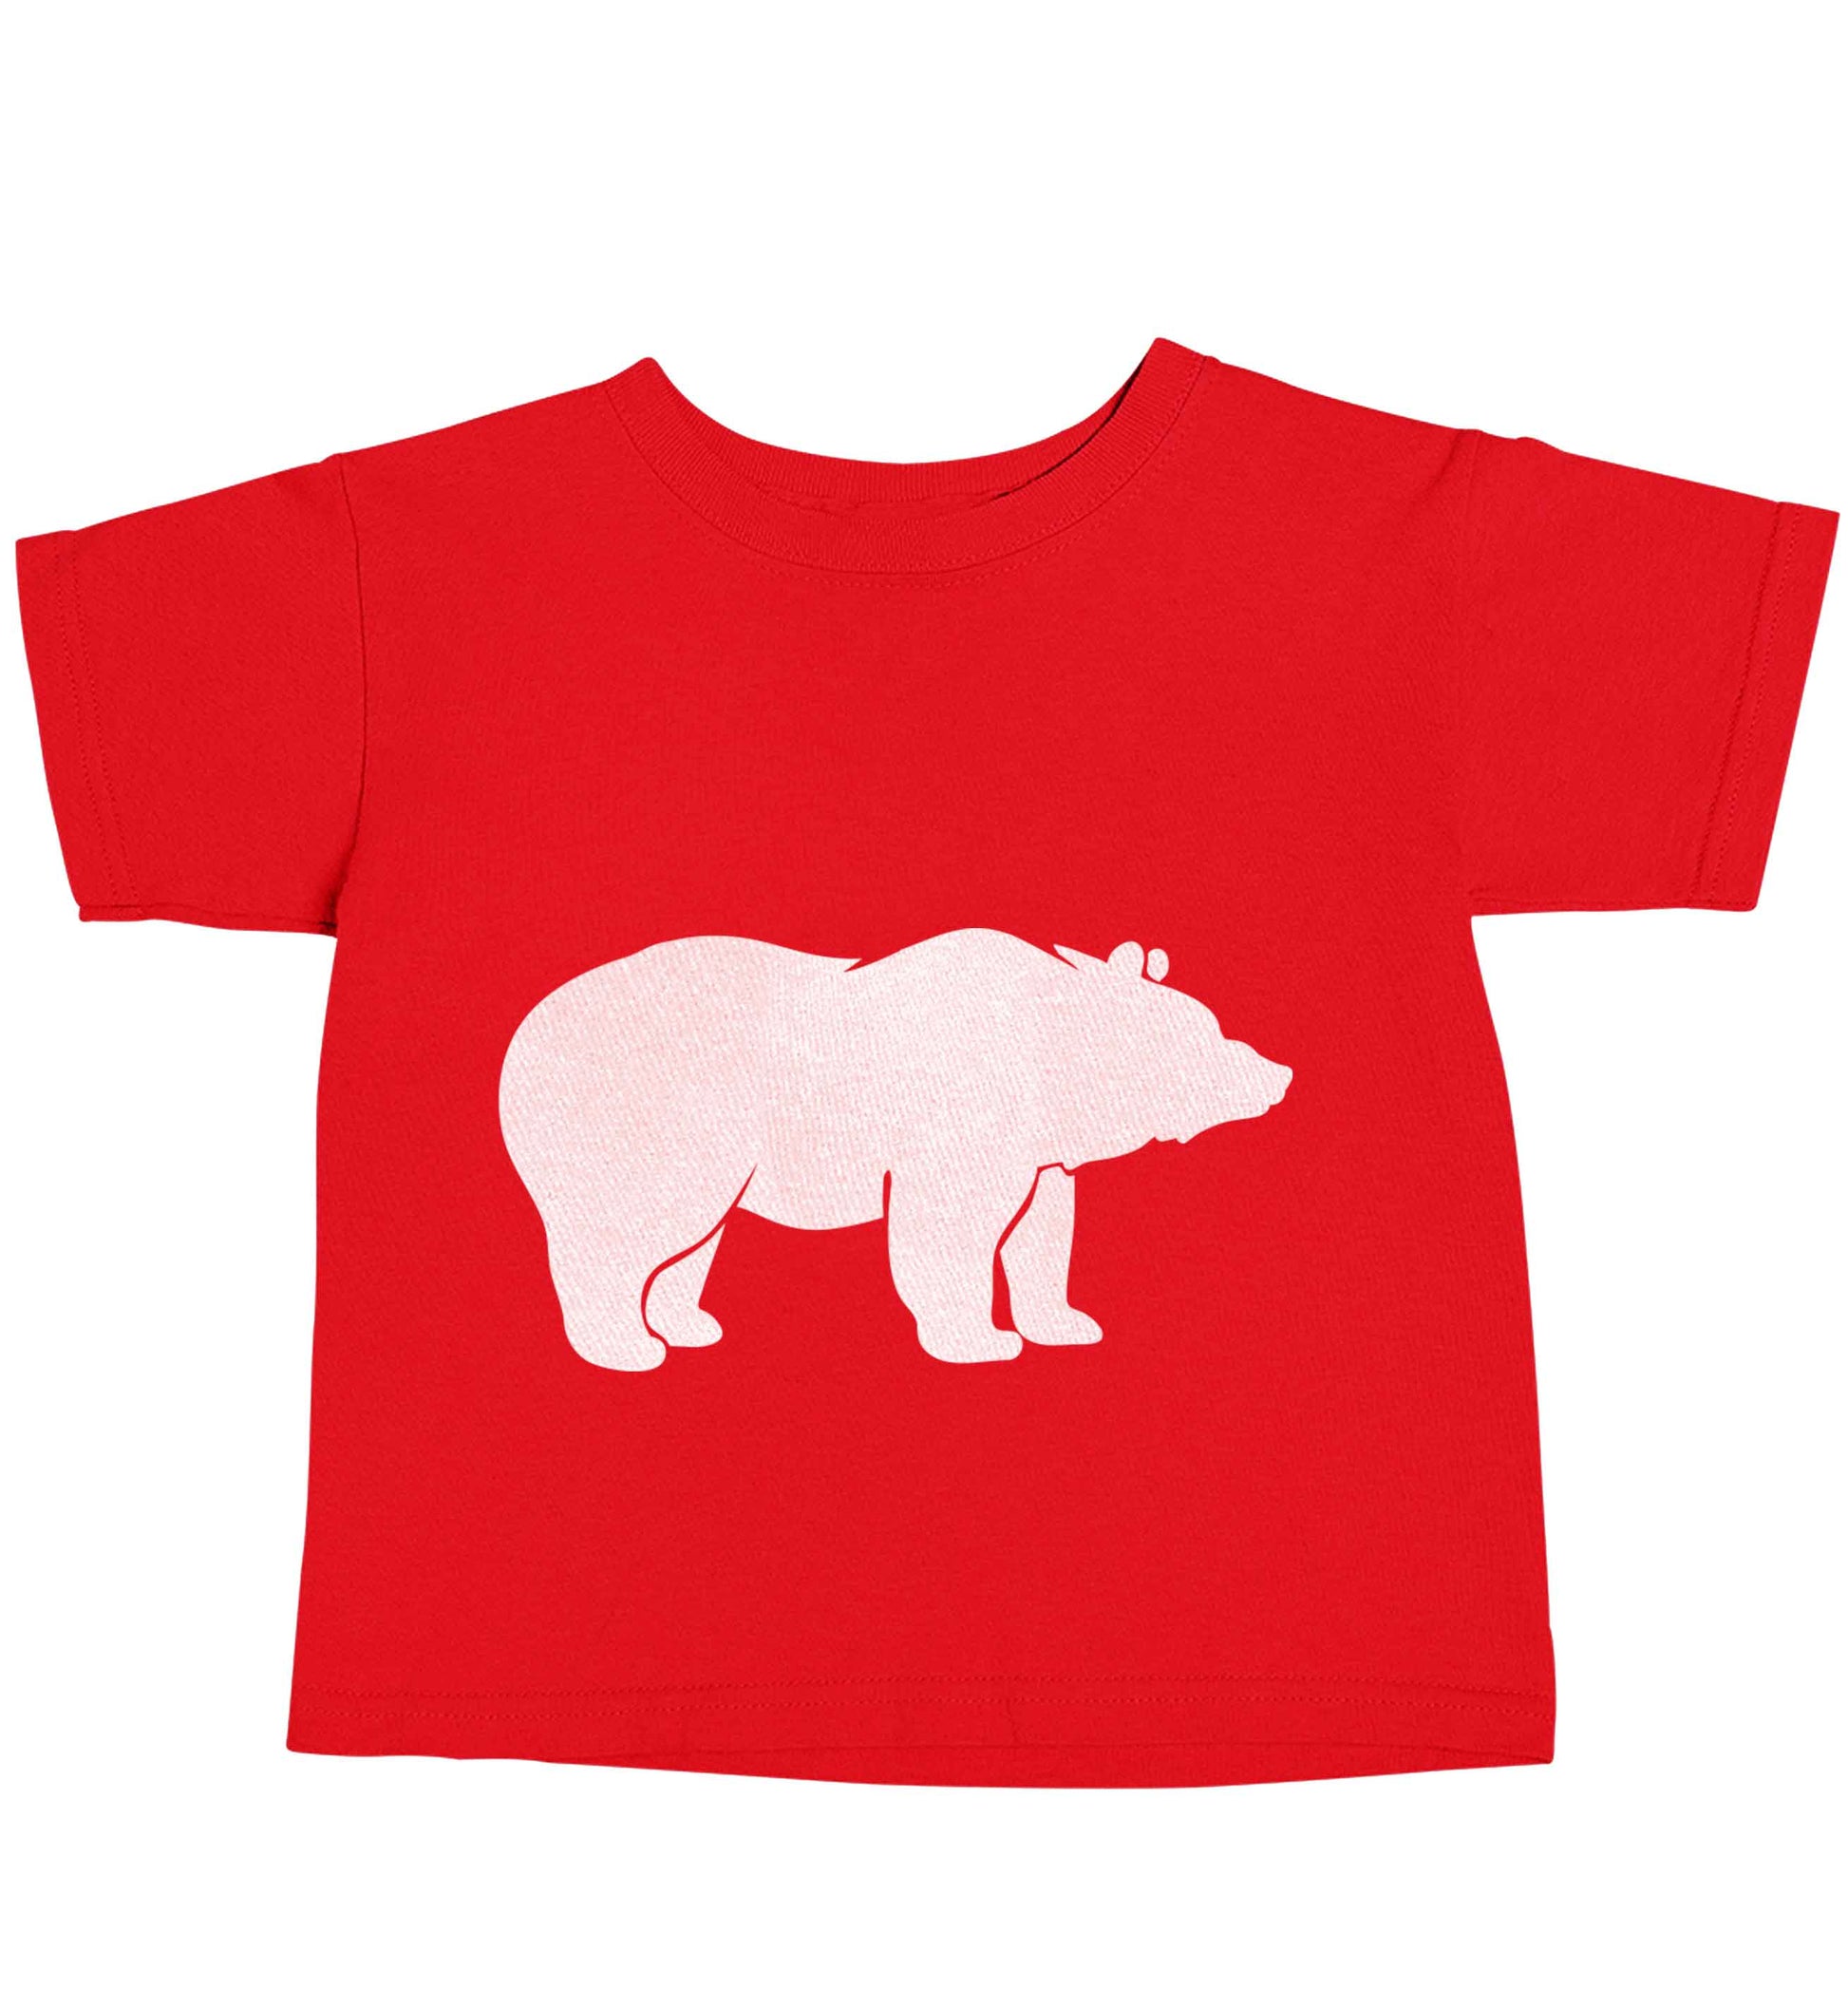 Blue bear red baby toddler Tshirt 2 Years